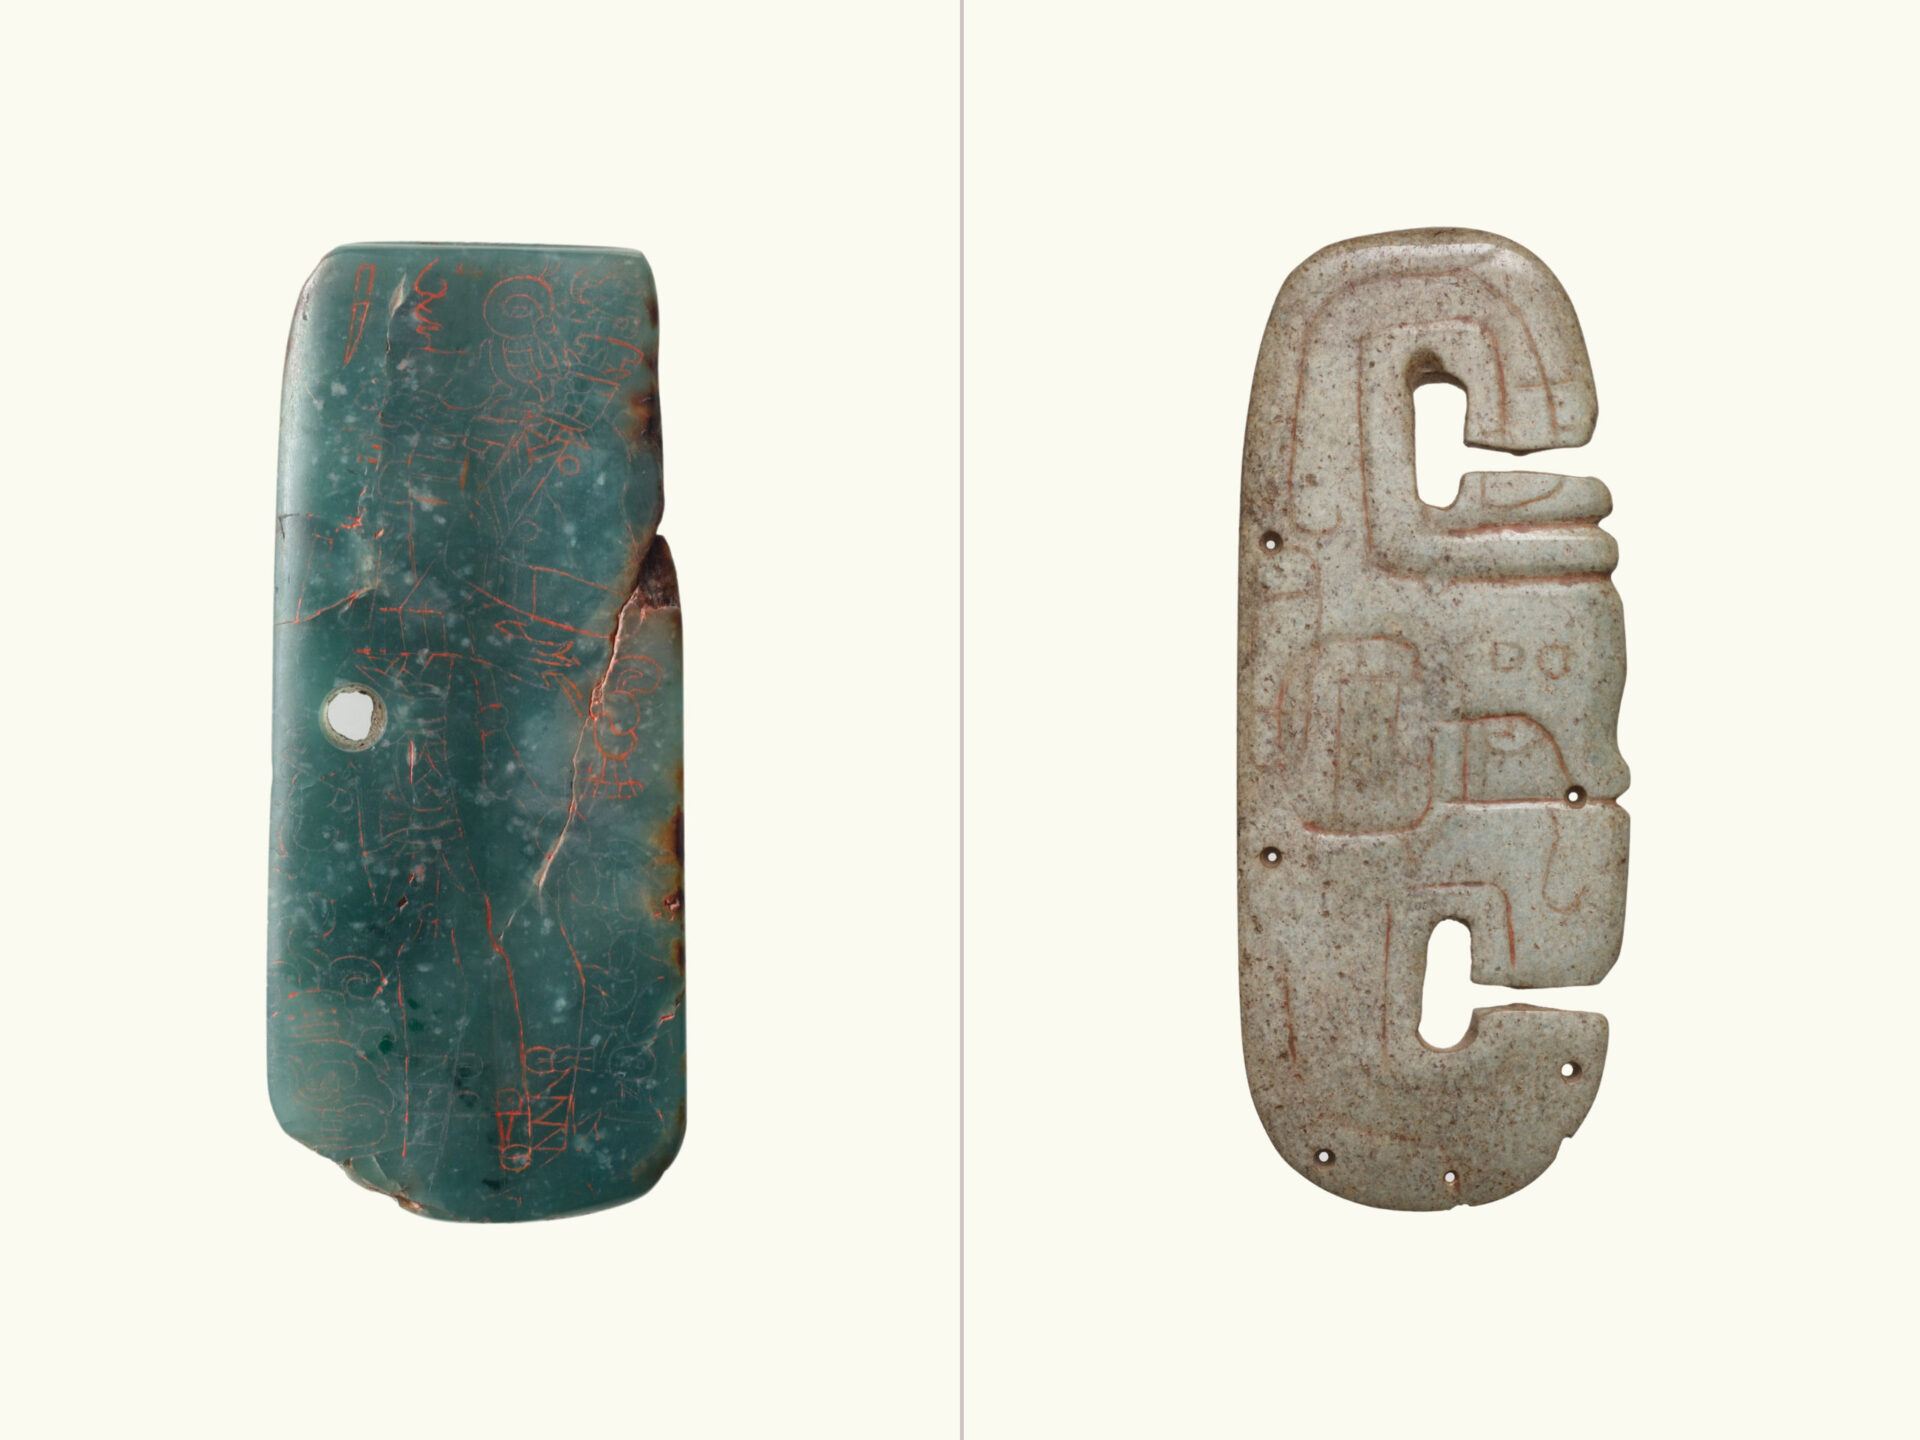 A comparison of two objects: translucent blue-green jade with orange pigment plaque (left) and light green jadeite plaque (right).